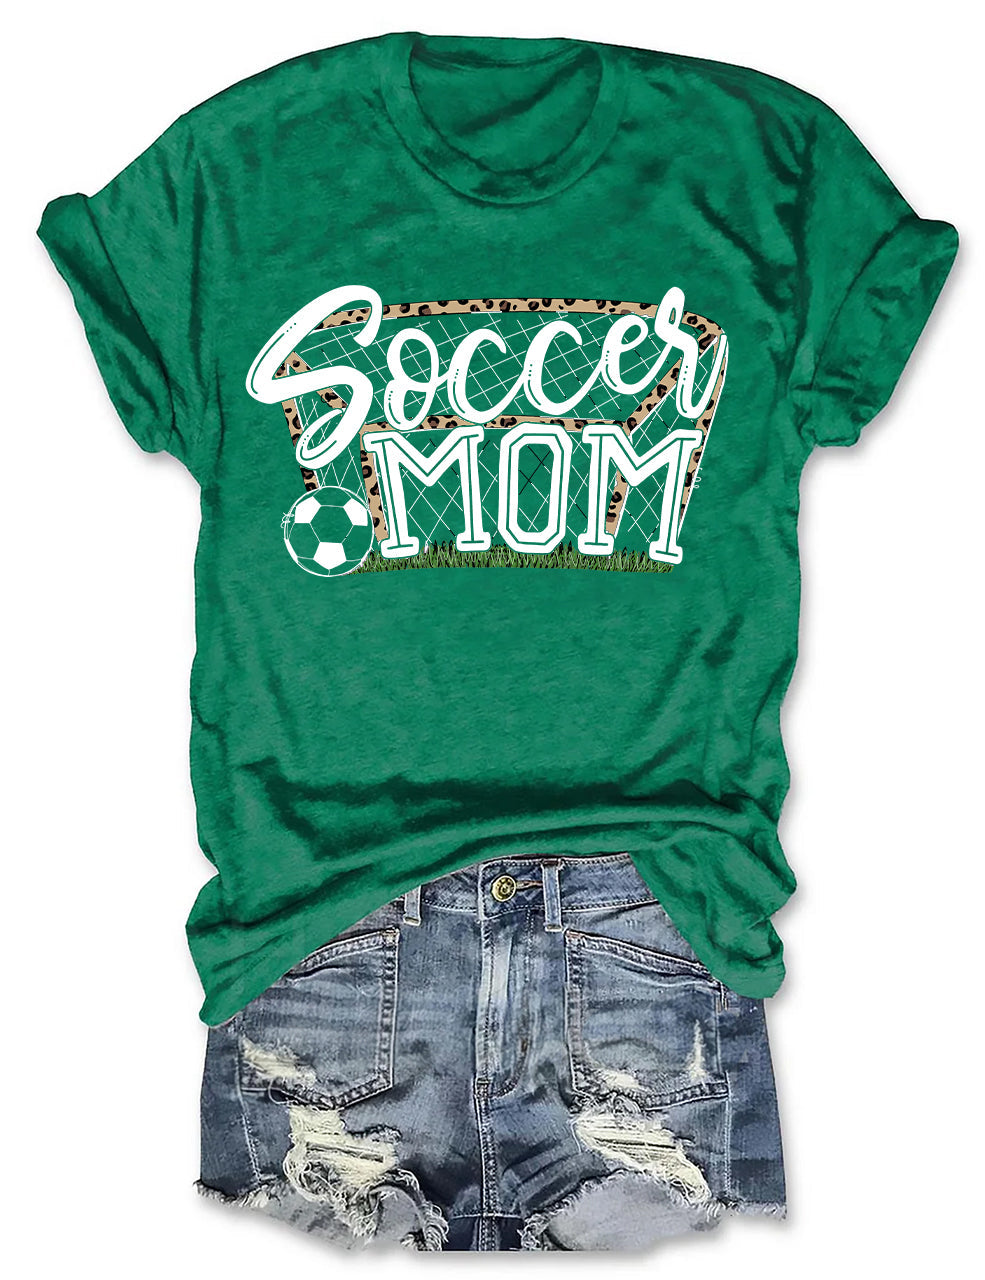 Soccer Mom with Leopard Print Net and Soccer Ball T-shirt